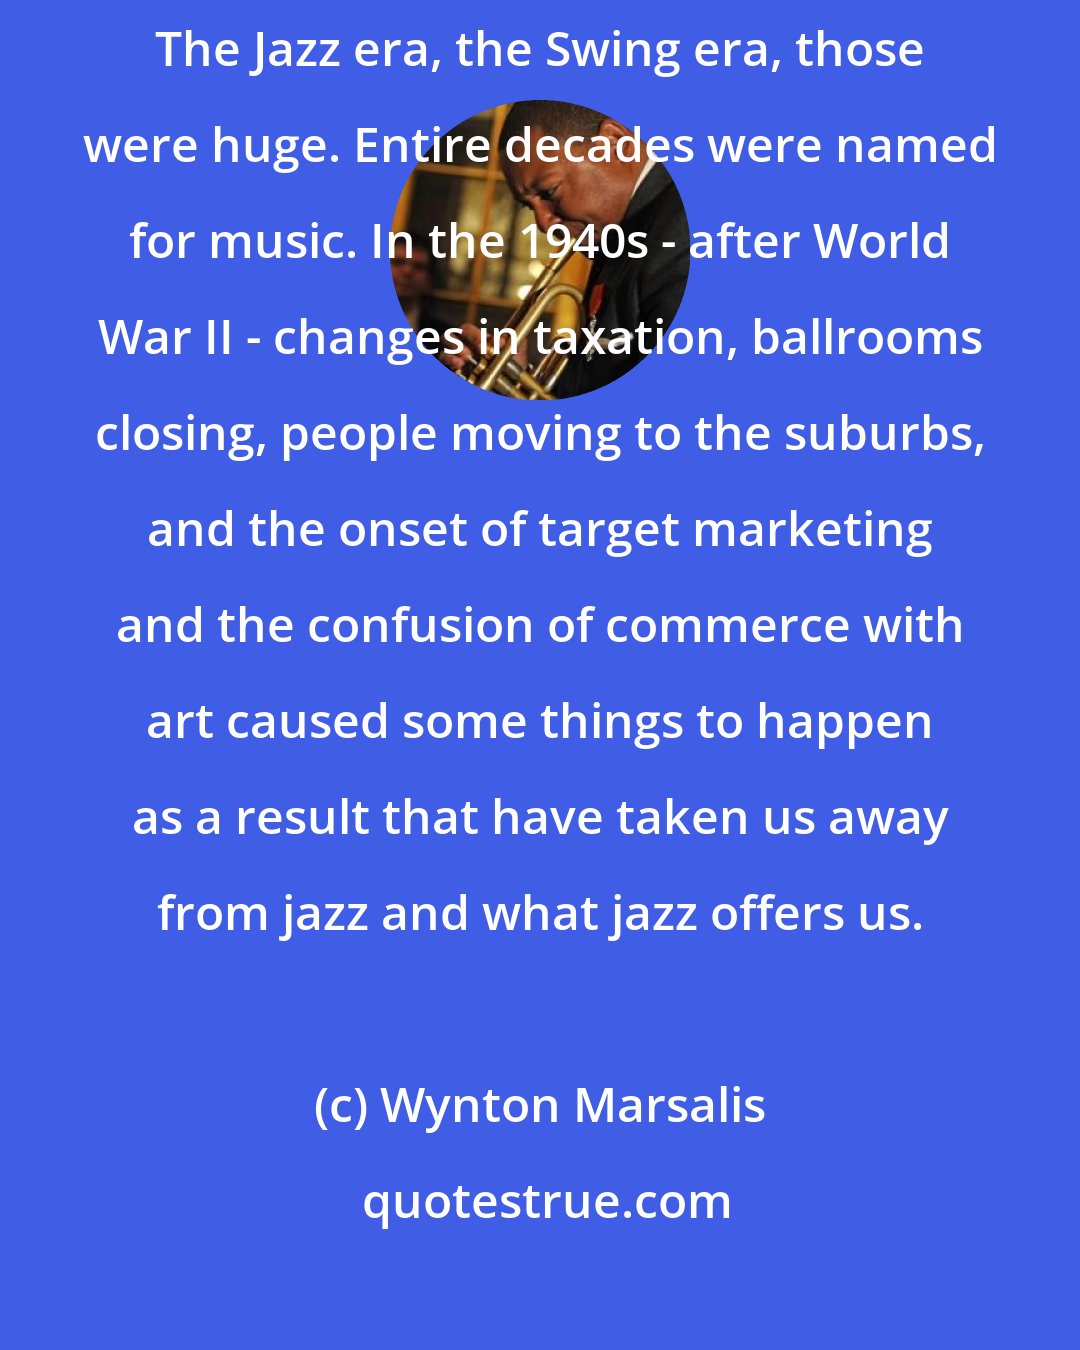 Wynton Marsalis: I worry more about the marketing that's taken hold since the 70s. The Jazz era, the Swing era, those were huge. Entire decades were named for music. In the 1940s - after World War II - changes in taxation, ballrooms closing, people moving to the suburbs, and the onset of target marketing and the confusion of commerce with art caused some things to happen as a result that have taken us away from jazz and what jazz offers us.